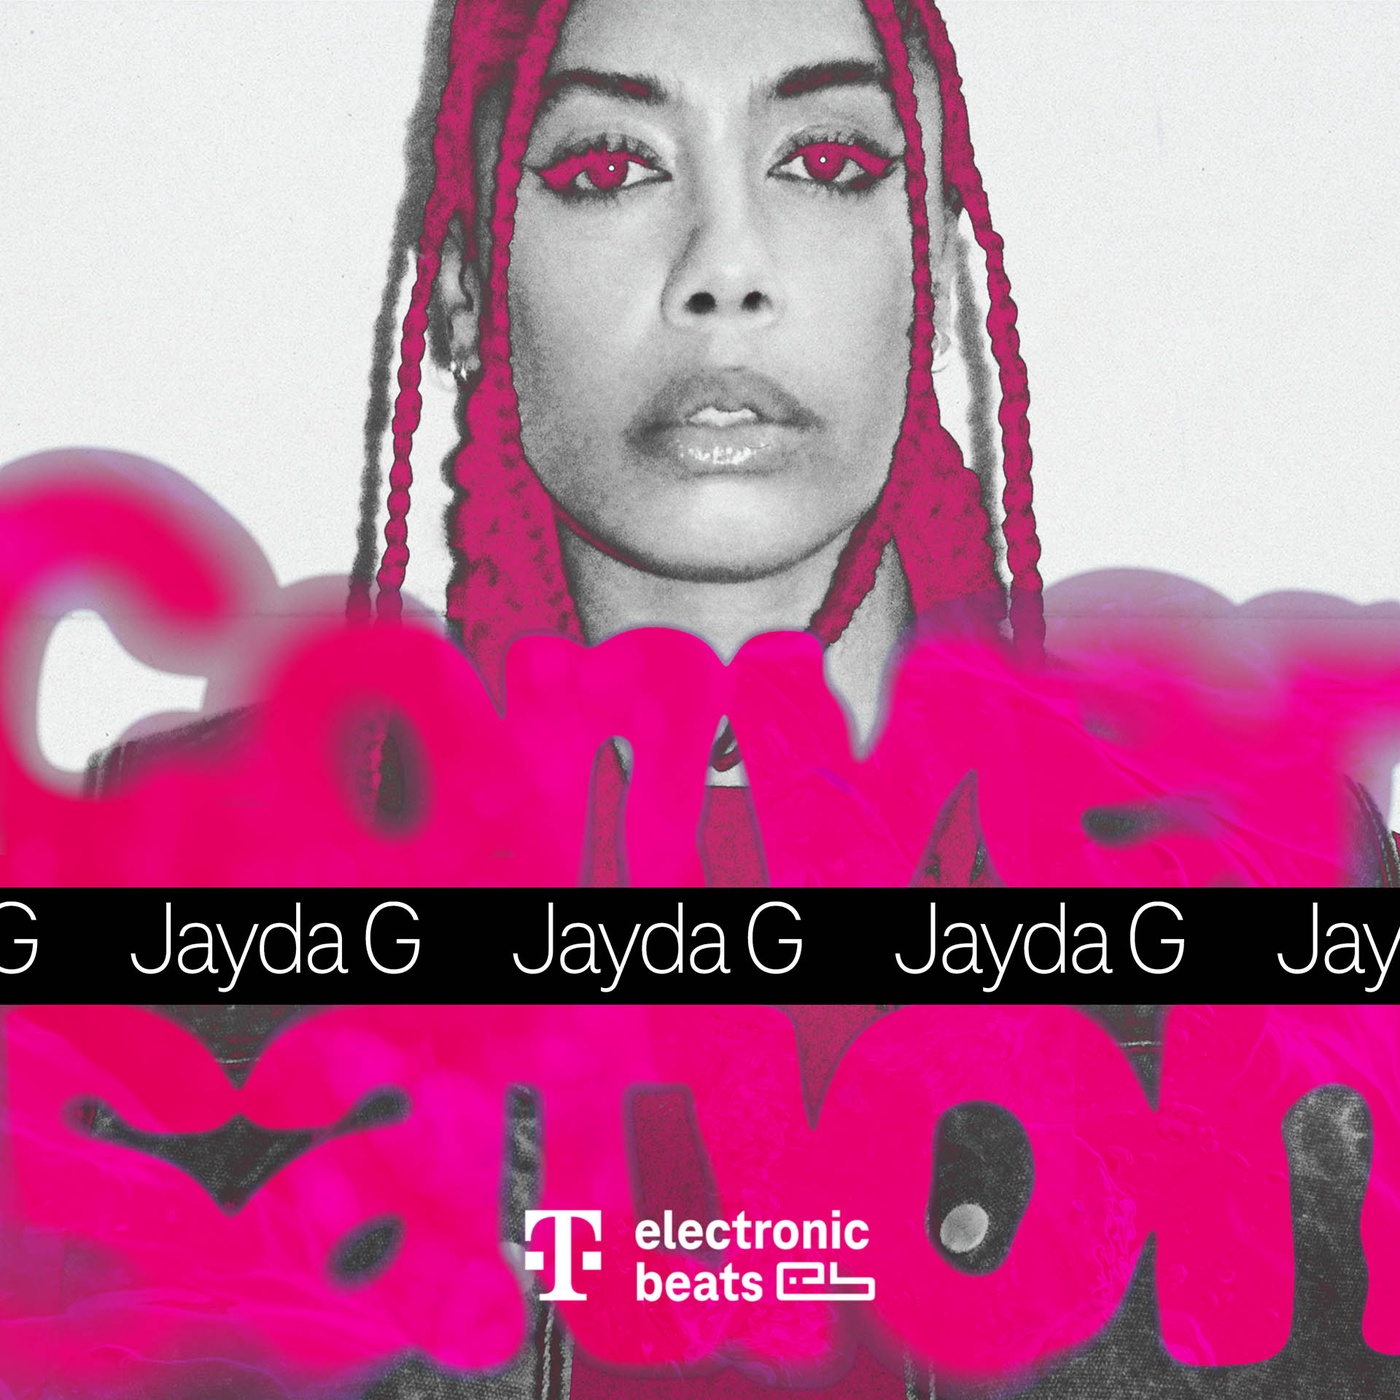 Jayda G in conversation: family, new album, science in music